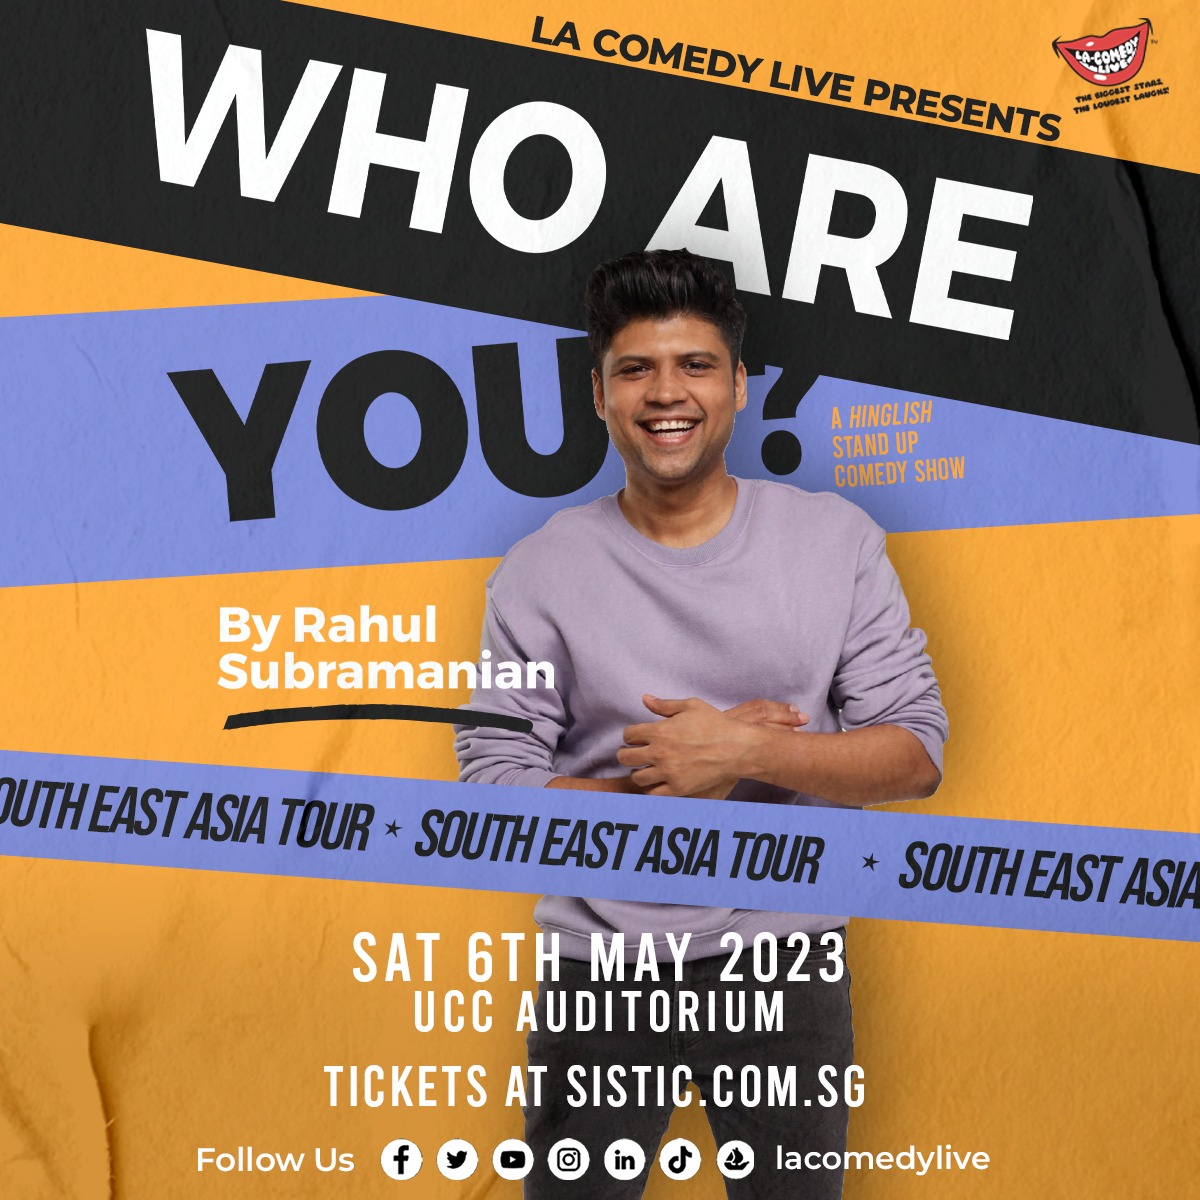 Attention! Last call for you to get your Early Bird tickets to Rahul Subramanian's show! By April 1st, tickets will be priced at $108, $98, and $78. Buy your tickets via sistic.com.sg/events/rahul05… now! #LAComedyLive #rahulsubramanian #randomchikibum #standup #standupcomedy #comedy